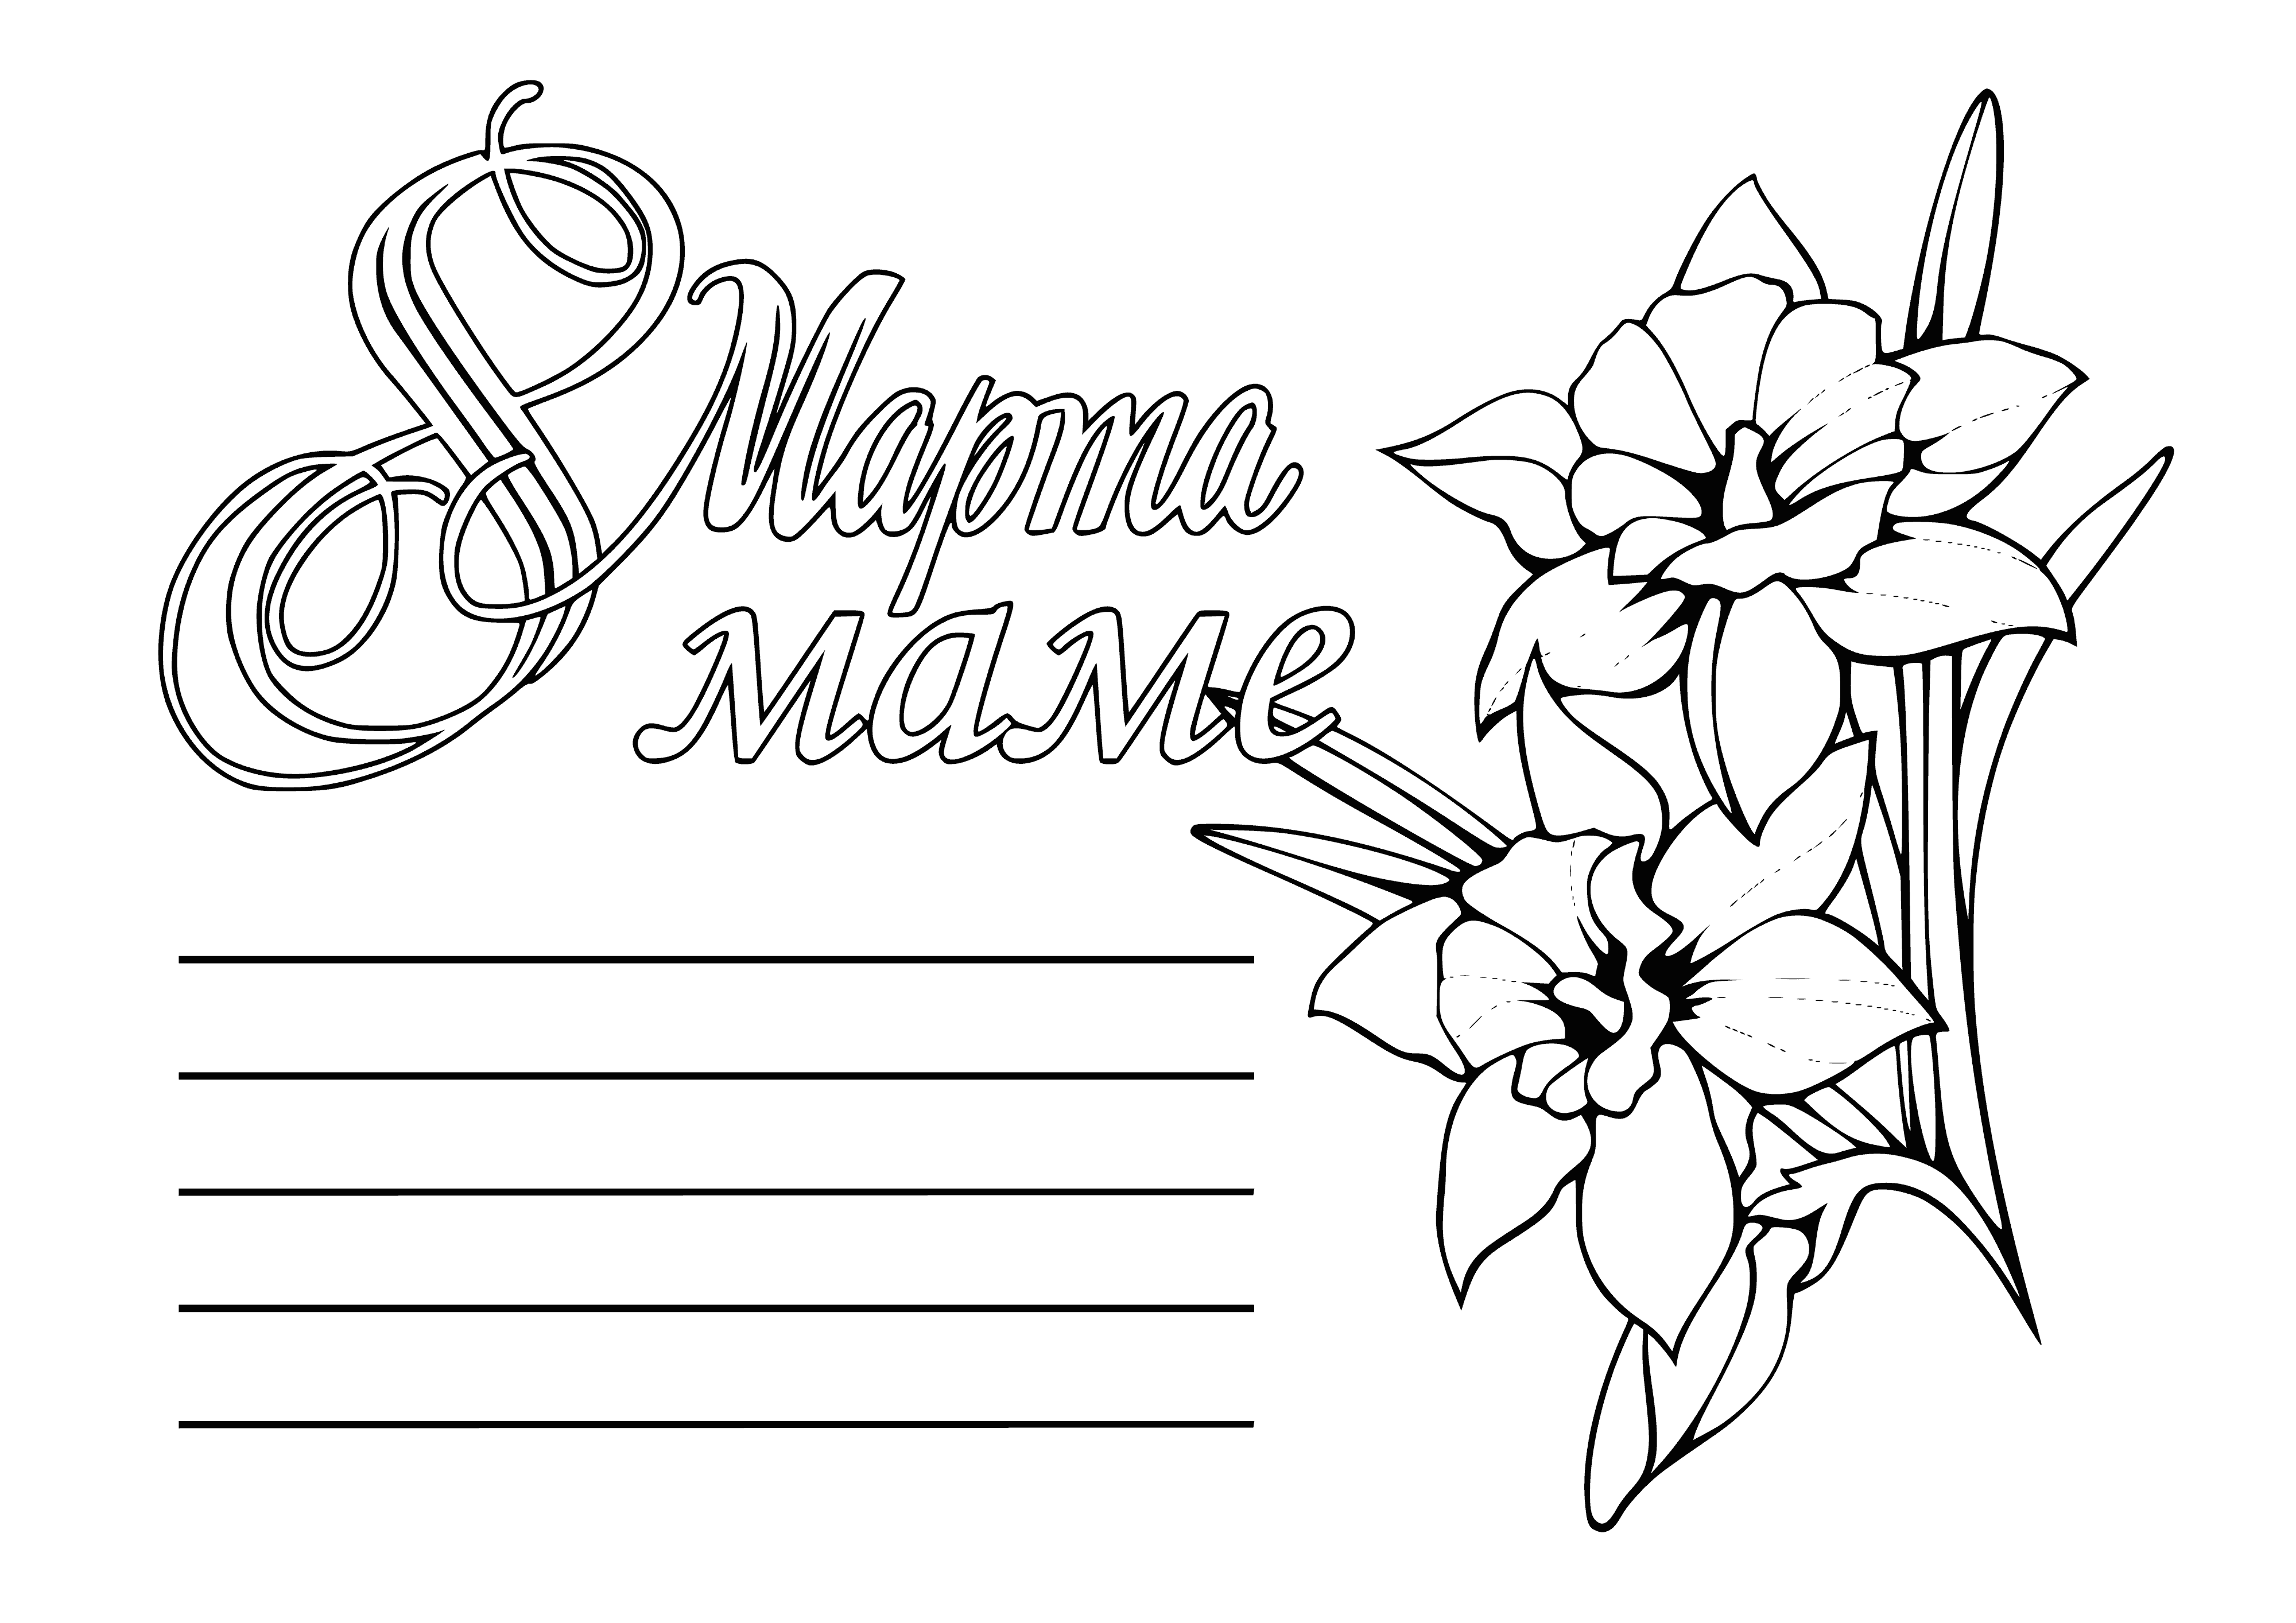 Mom by March 8 coloring page